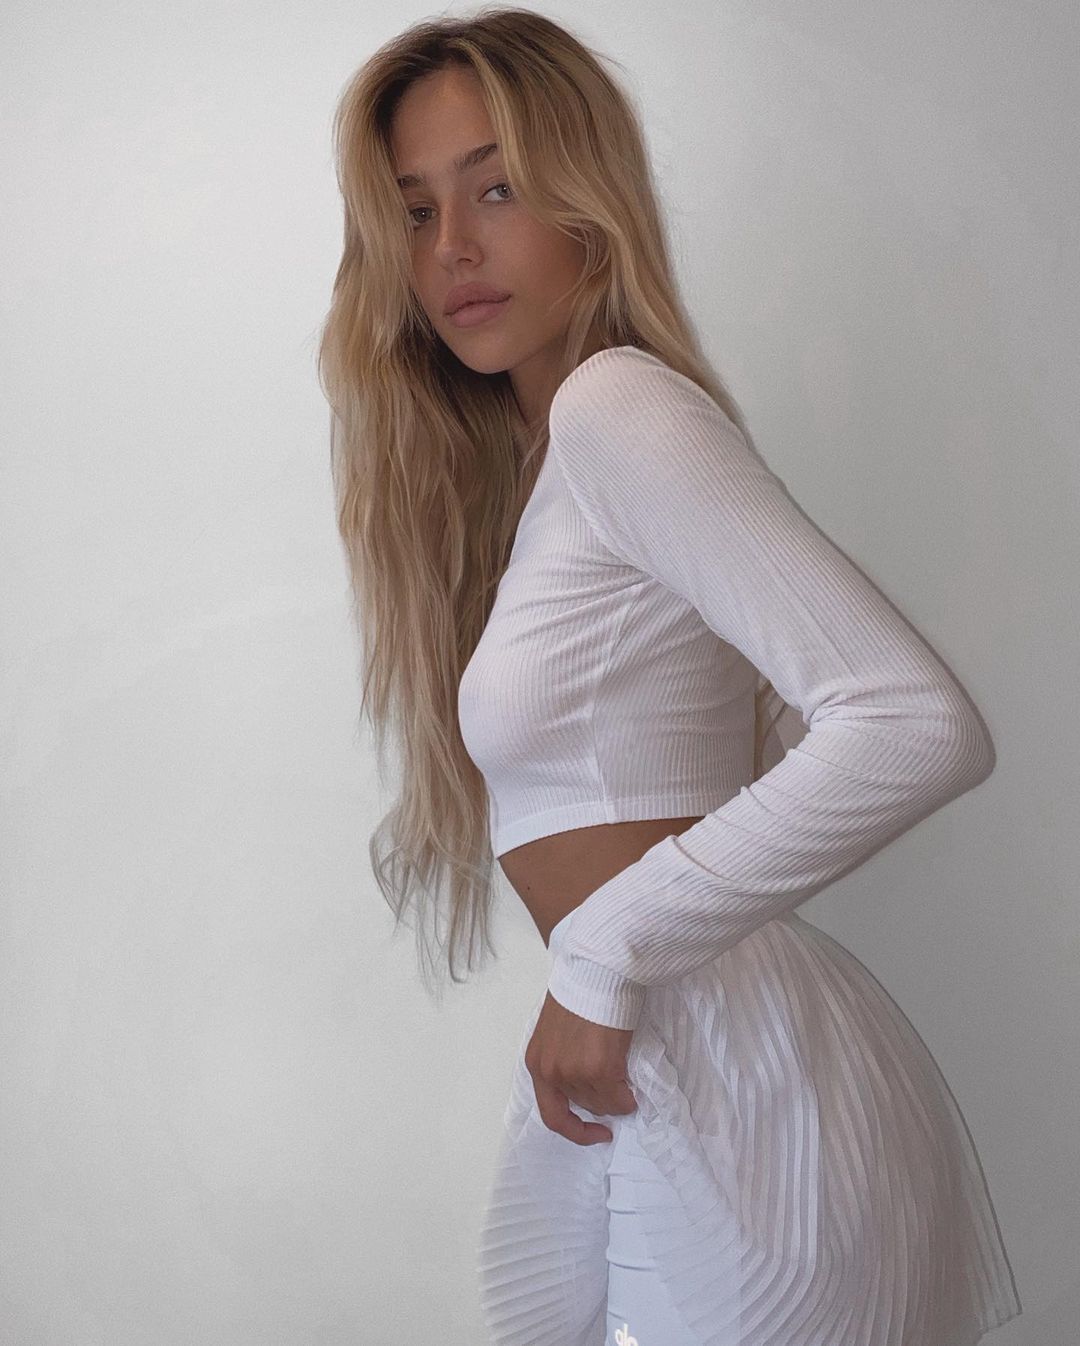 PHOTOS Delilah Belle Hamlin clbre son single Nothing Lasts Forever! - Photo 14